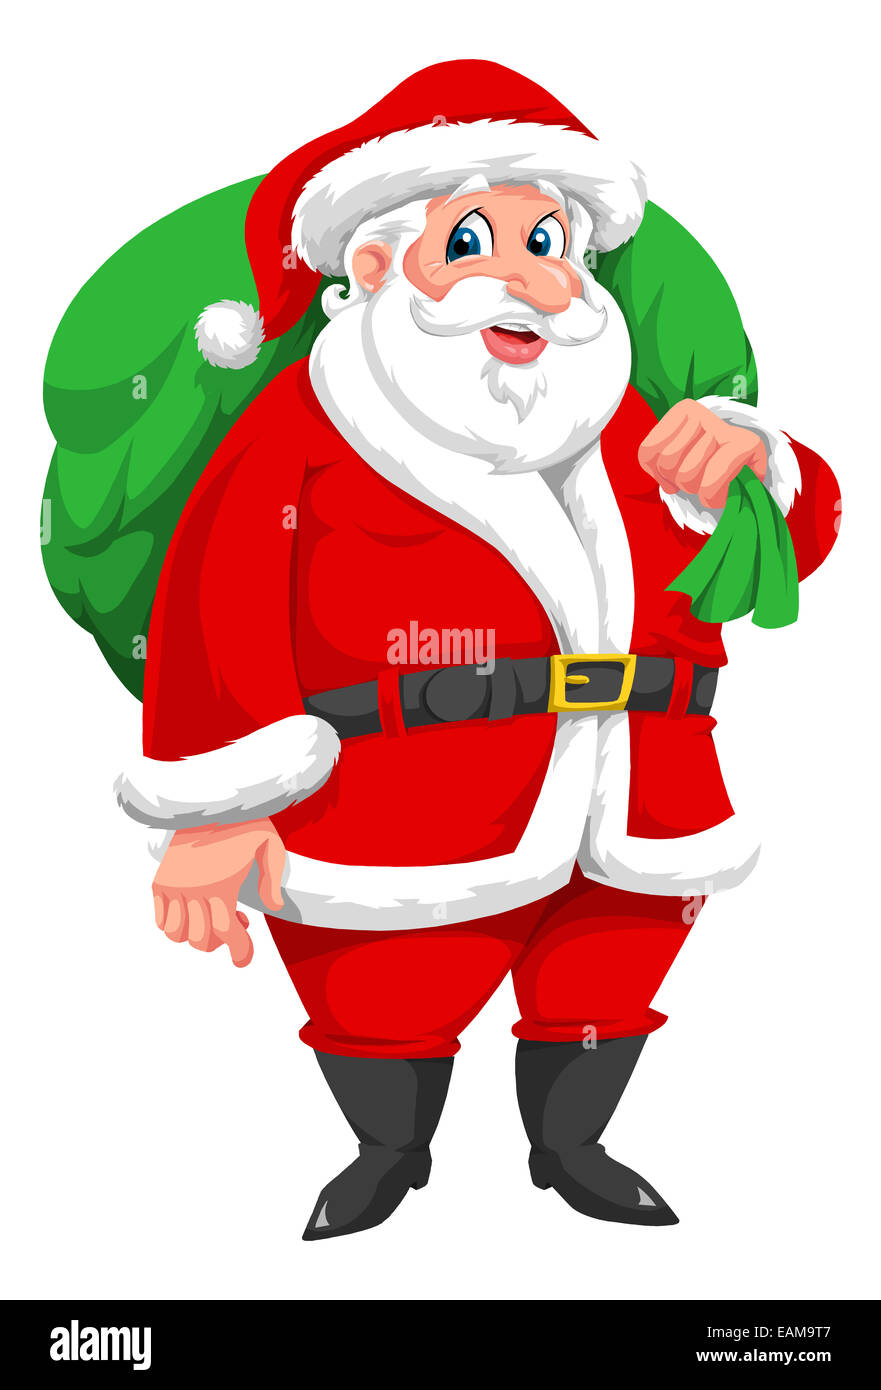 Santa Claus with Green Sack Full of Presents, vector illustration Stock Photo